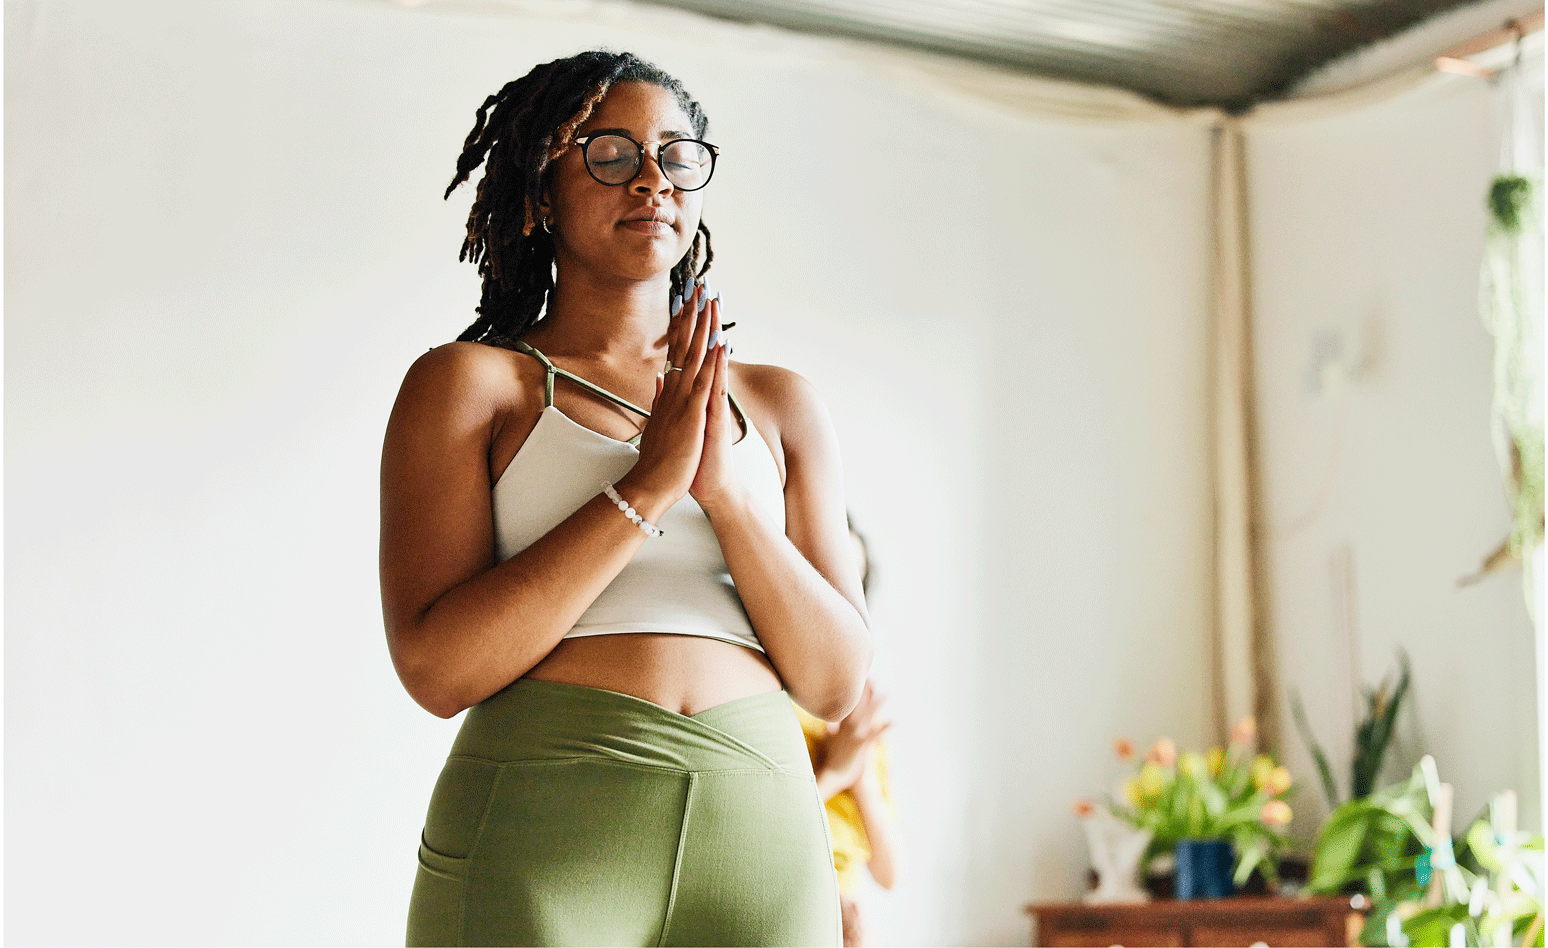 Yoga that's grounded in social justice and marketed to bodies of